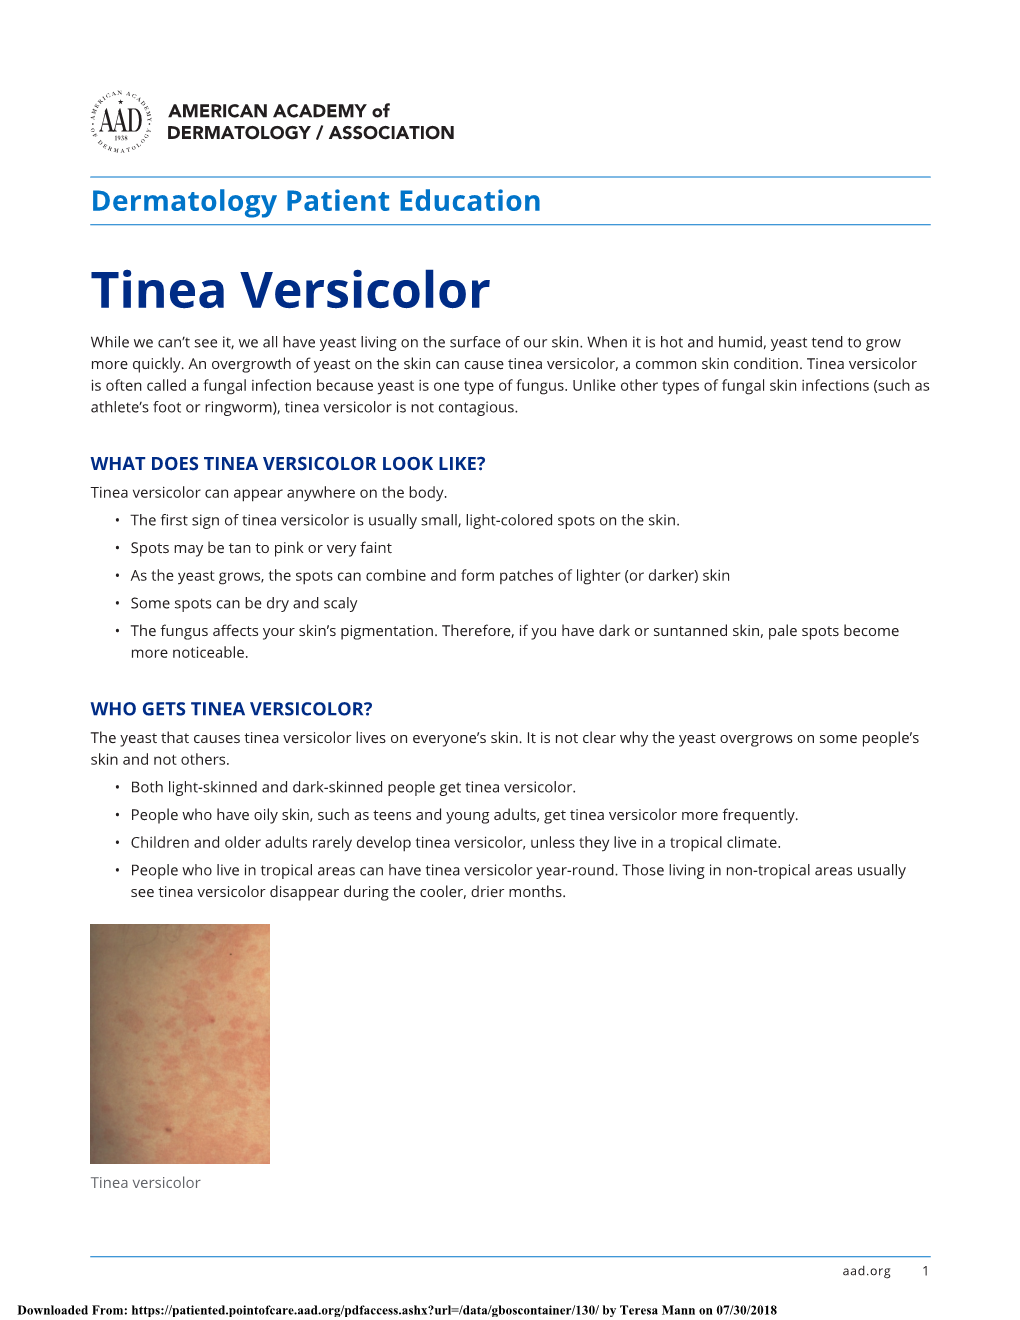 Tinea Versicolor While We Can’T See It, We All Have Yeast Living on the Surface of Our Skin